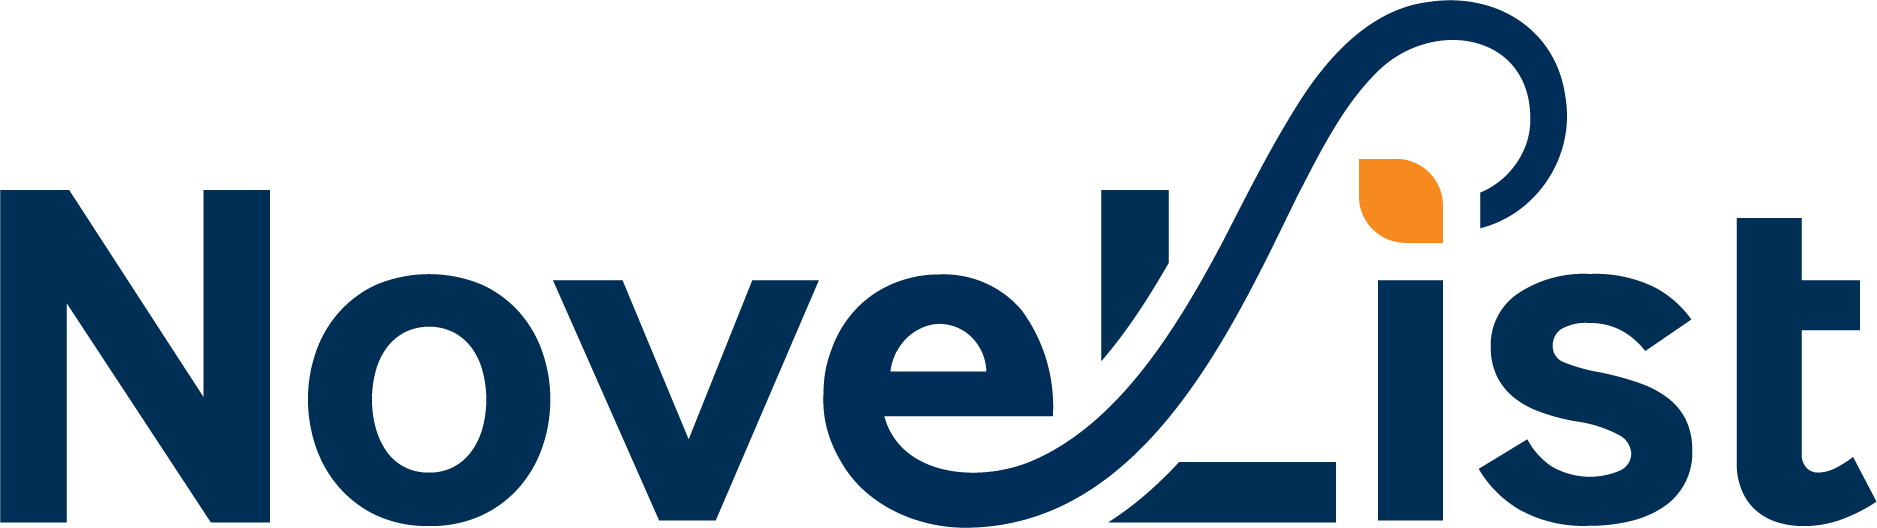 The NoveList logo, featuring stylized text spelling the company name. The dot over the letter I is shaped like a leaf.